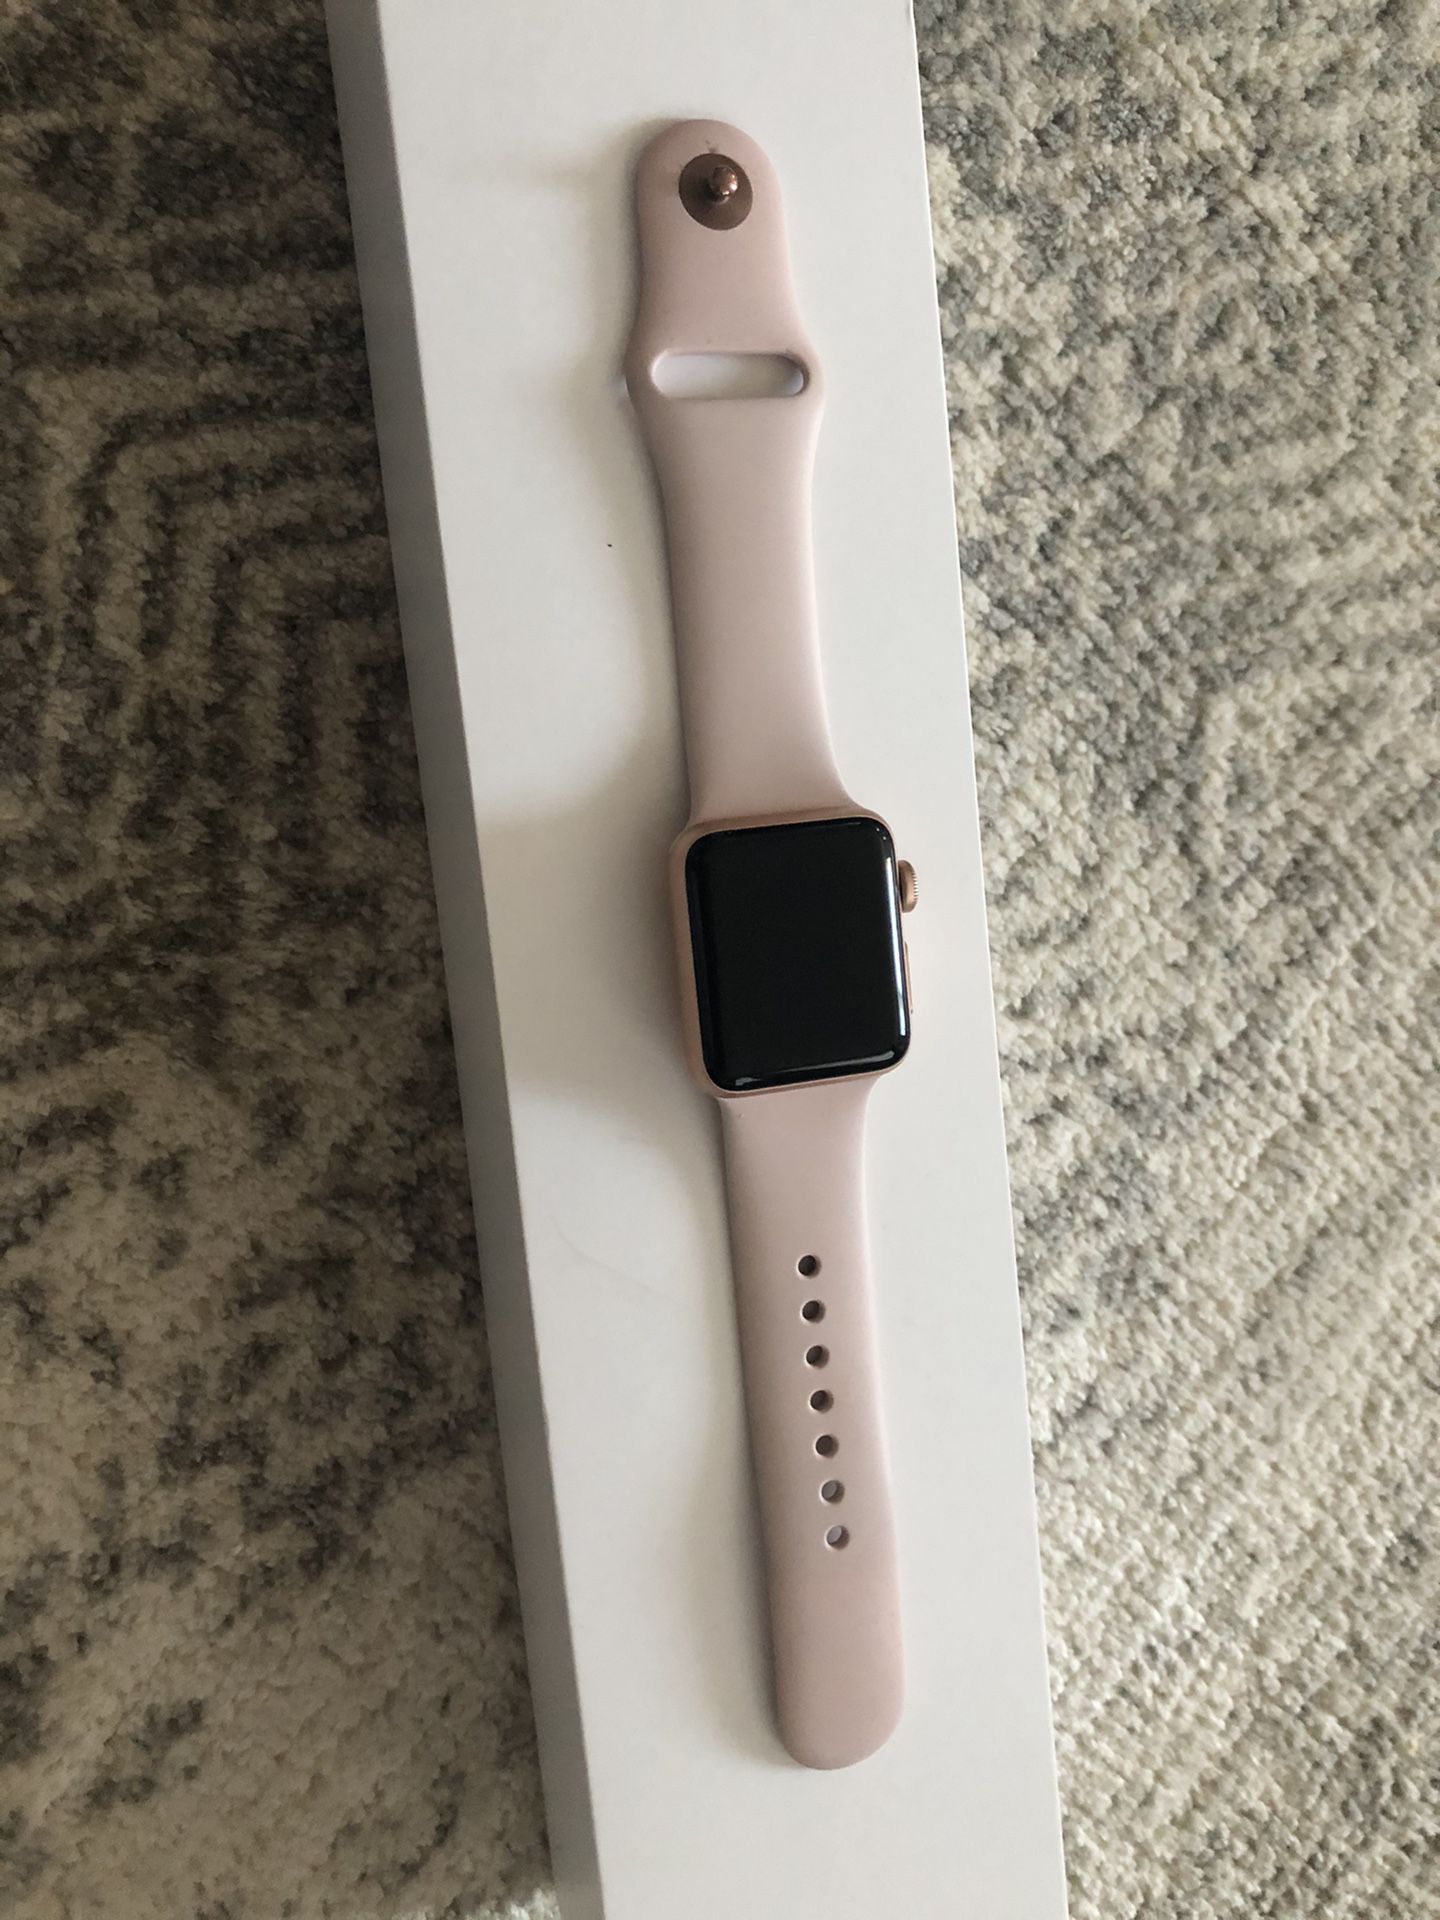 Apple Watch series 3, LTE, GPS and cellular 38mm